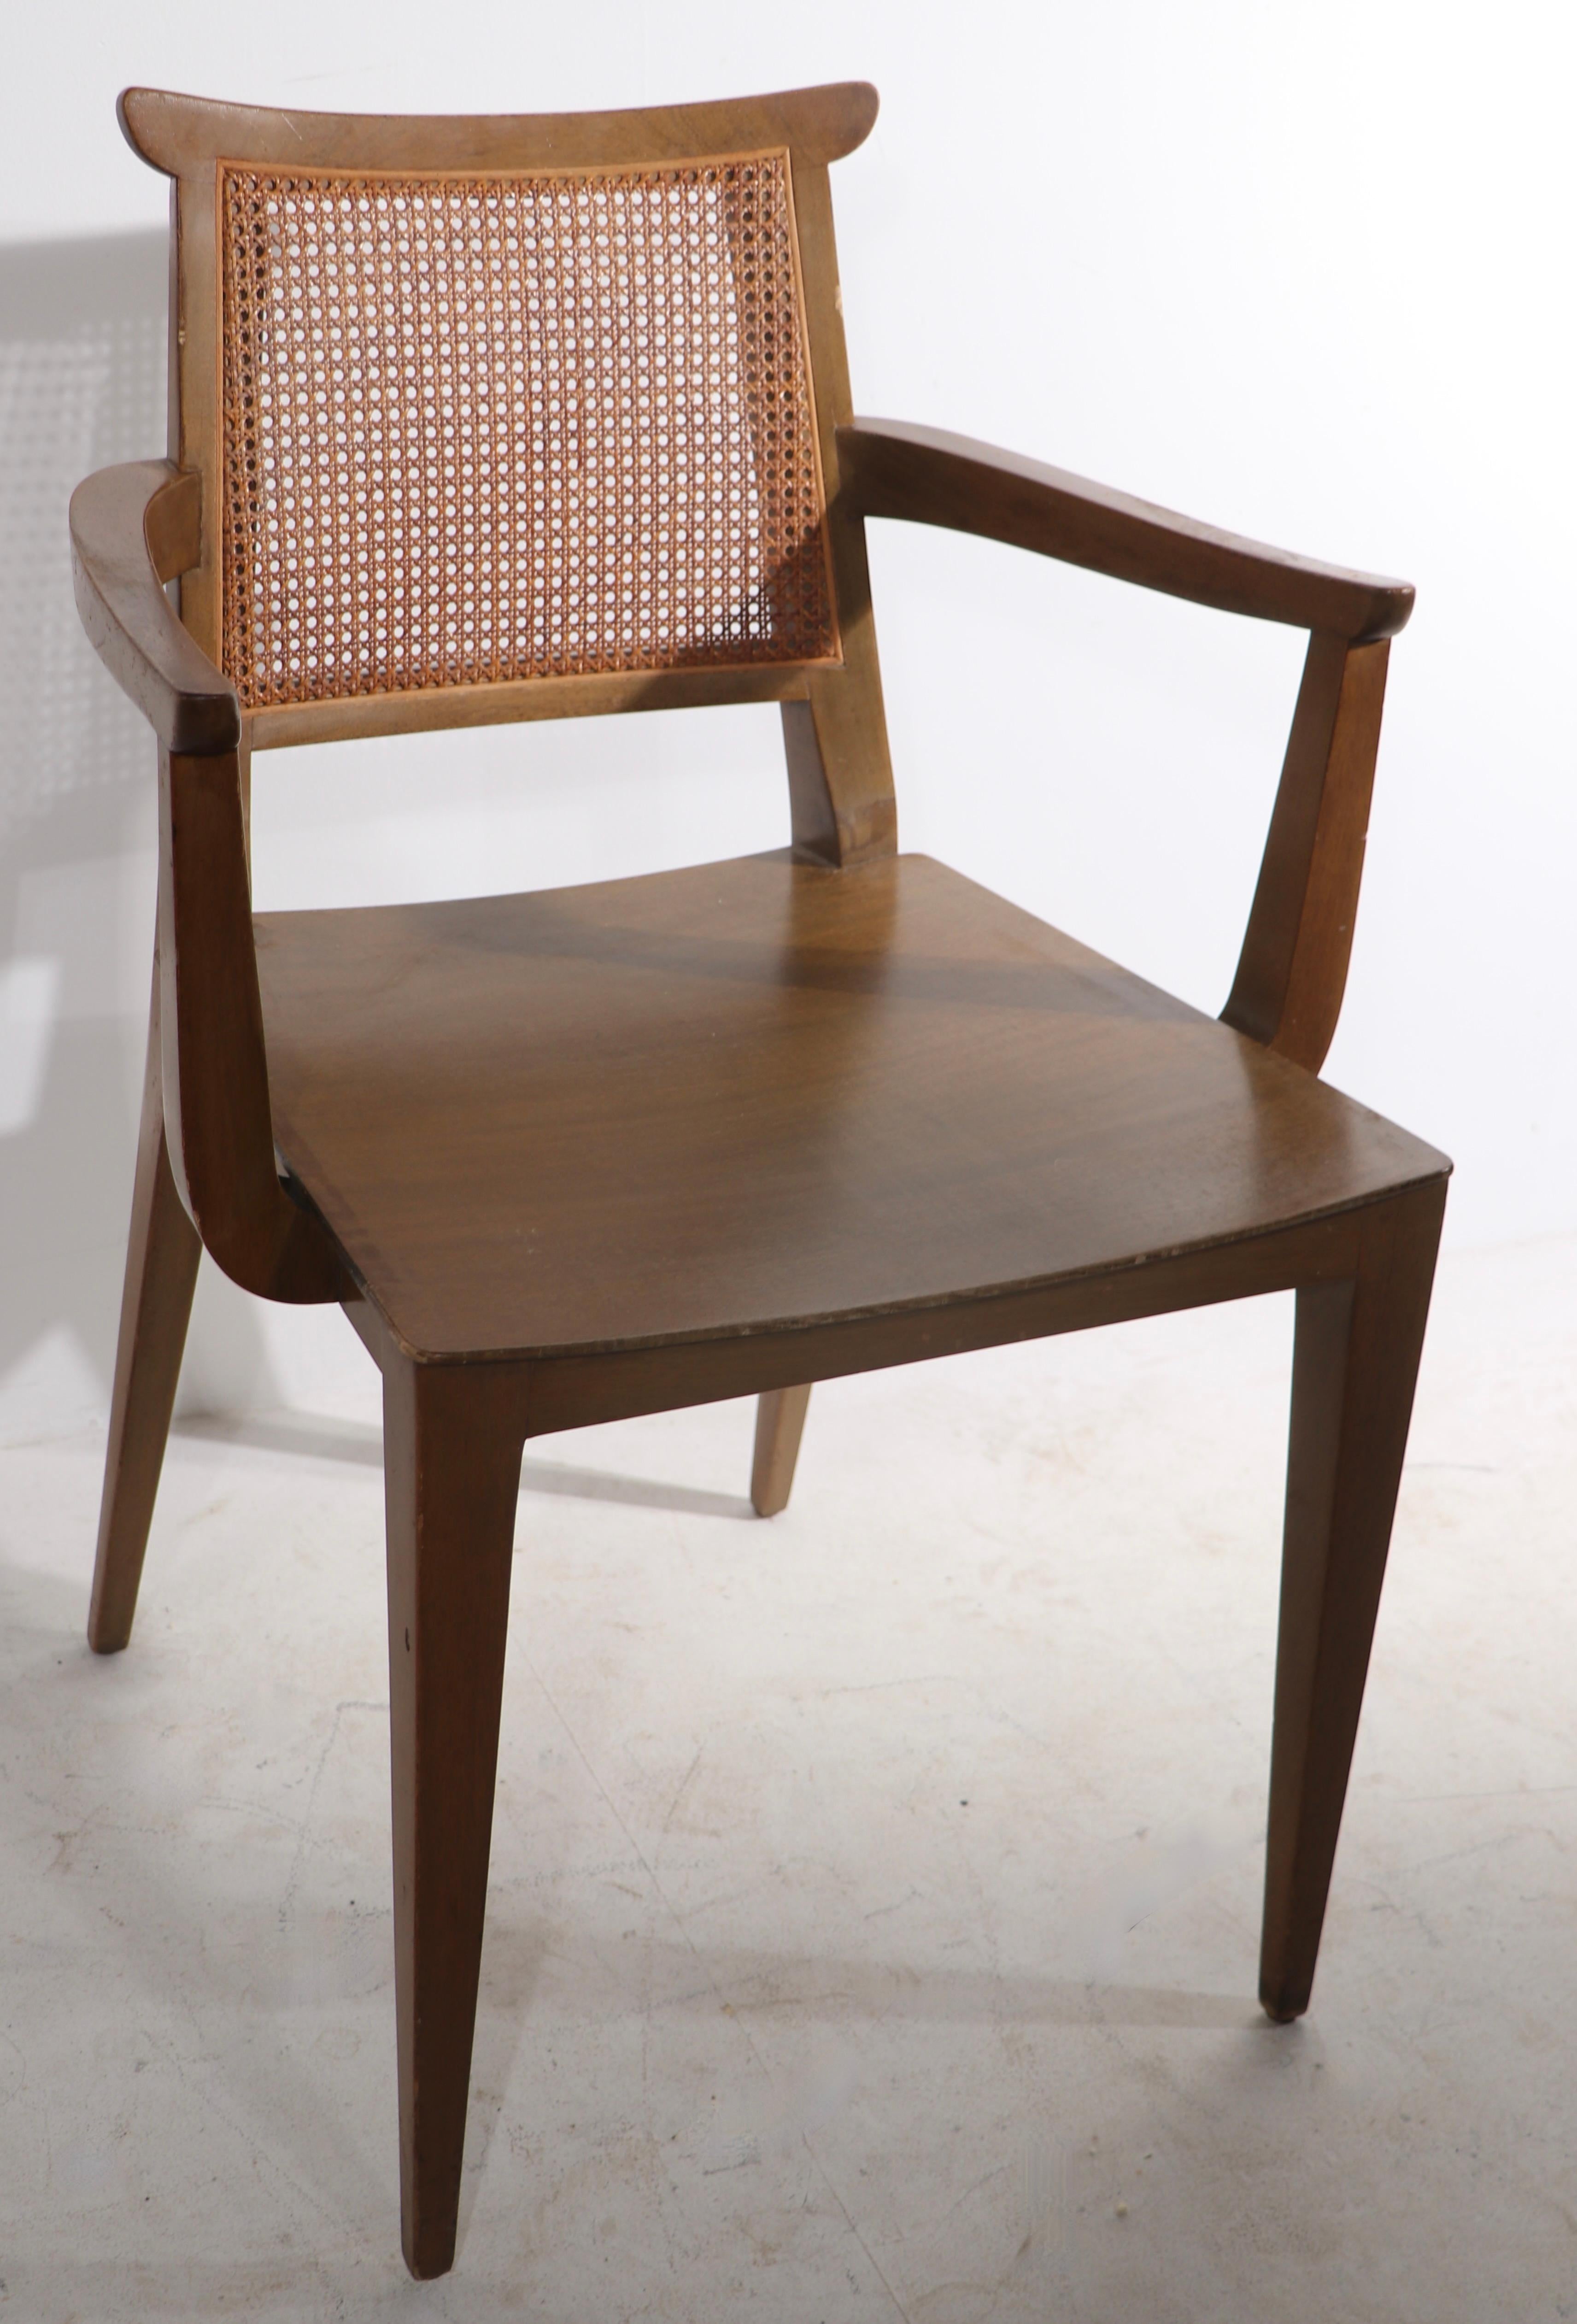 Rare set of dining chairs, designed by Edward Wormley for Dunbar, circa 1940/1950's. The chairs feature mahogany frames, caned backs and three come with original leather seat pad. All six are structurally sound and sturdy, the canning is intact and